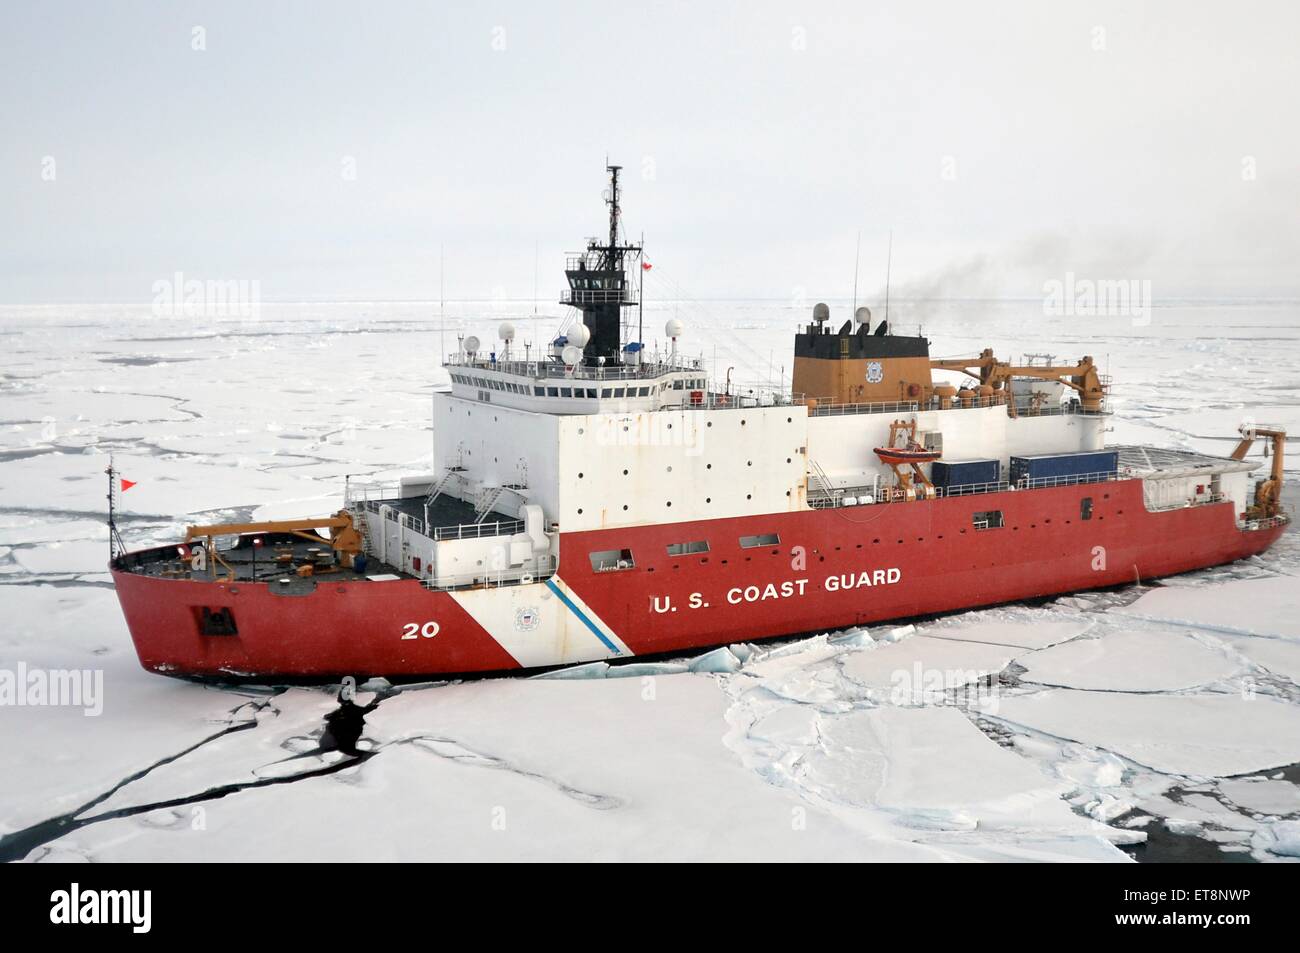 US Coast Guard Cutter Healy breaks ice August 31, 2009 in the Arctic. The Healy is the newest and most technologically advanced polar icebreaker owned by the Coast Guard. Stock Photo